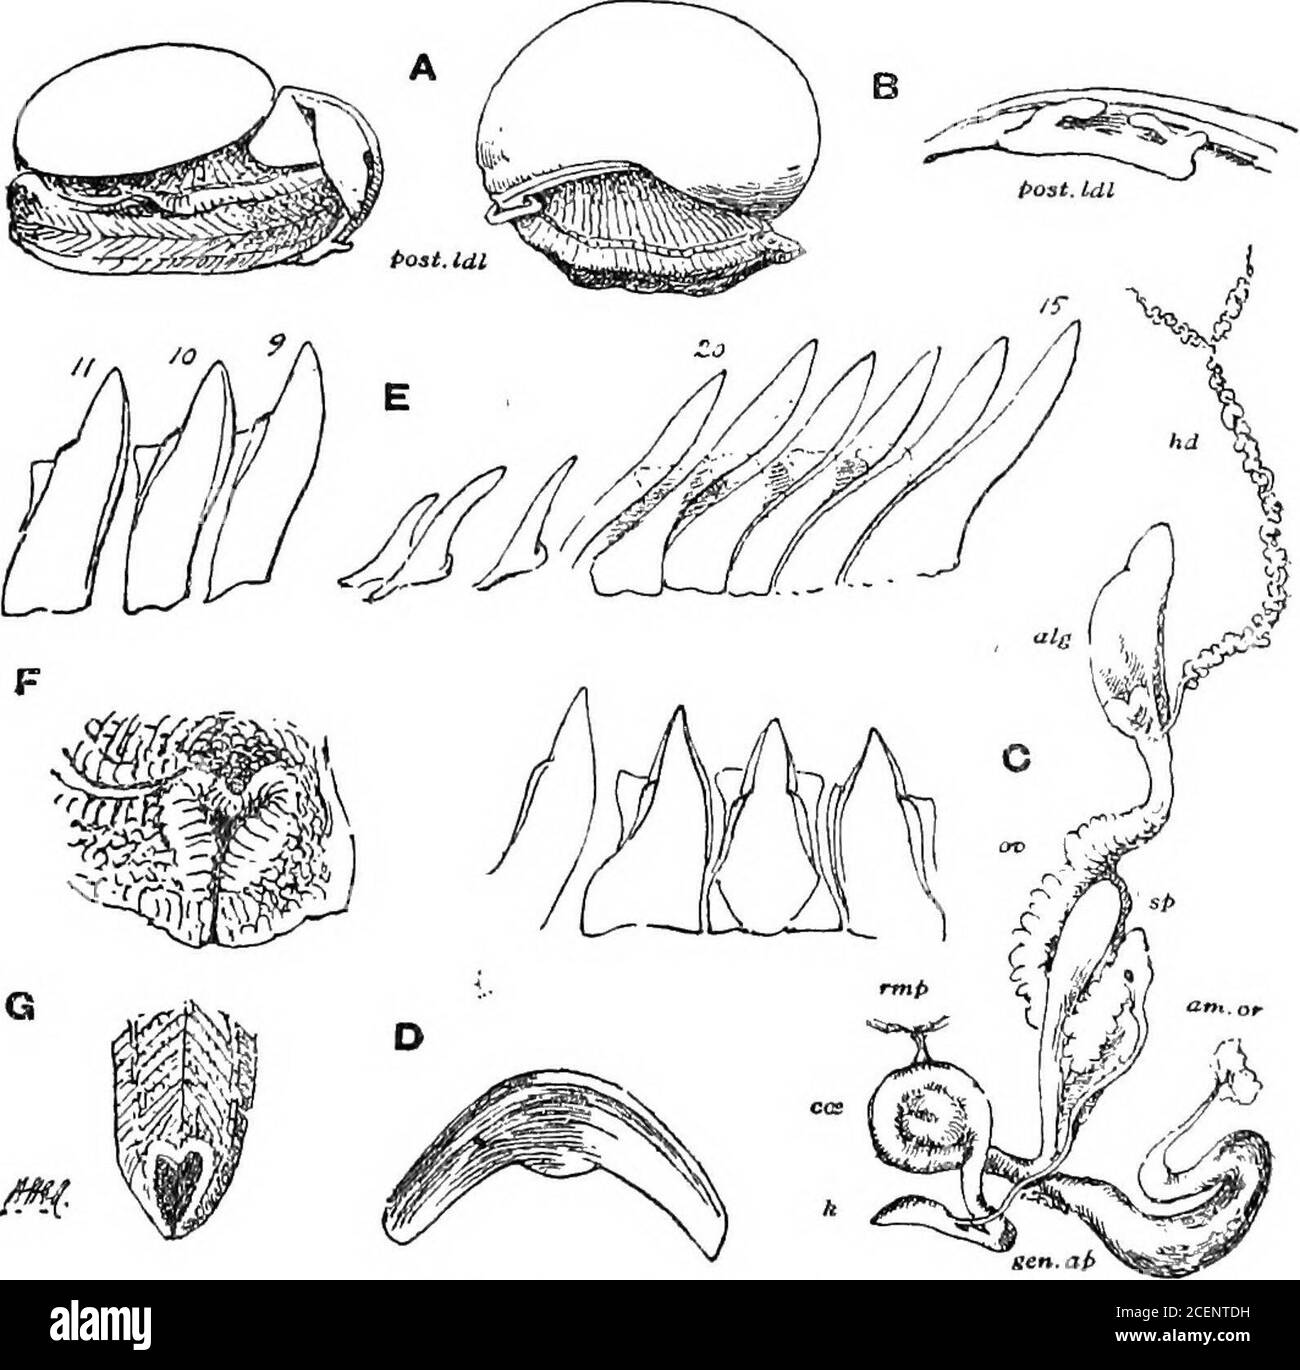 . Mollusca ... Pig. hQ.— Oxytes orobia. (From Stoliczkas drawing.). [Fig. 60.—OxyUs orobia. A. Animal, spirit-specimen, shell removed, tbe right and left sides showing dorsal lobes. B. The posterior left dorsal lobe, enlarged.0. Genitalia. D. Jaw. E. Teeth of the radula. X 150. F. Extremity of the foot, contracted in spirit, enlarged. Oxytes oxyies. G. Extremity of foot, drawn from life.] OXYTES.—BHNSONIA. 171 peristome oblique, acute, but thickened inside, basal and columellarmargins somewhat reflected. Major diam. 37, min. 30, height 22 mm. A more depressedshell measares 34, 29, and 19 mm. H Stock Photo